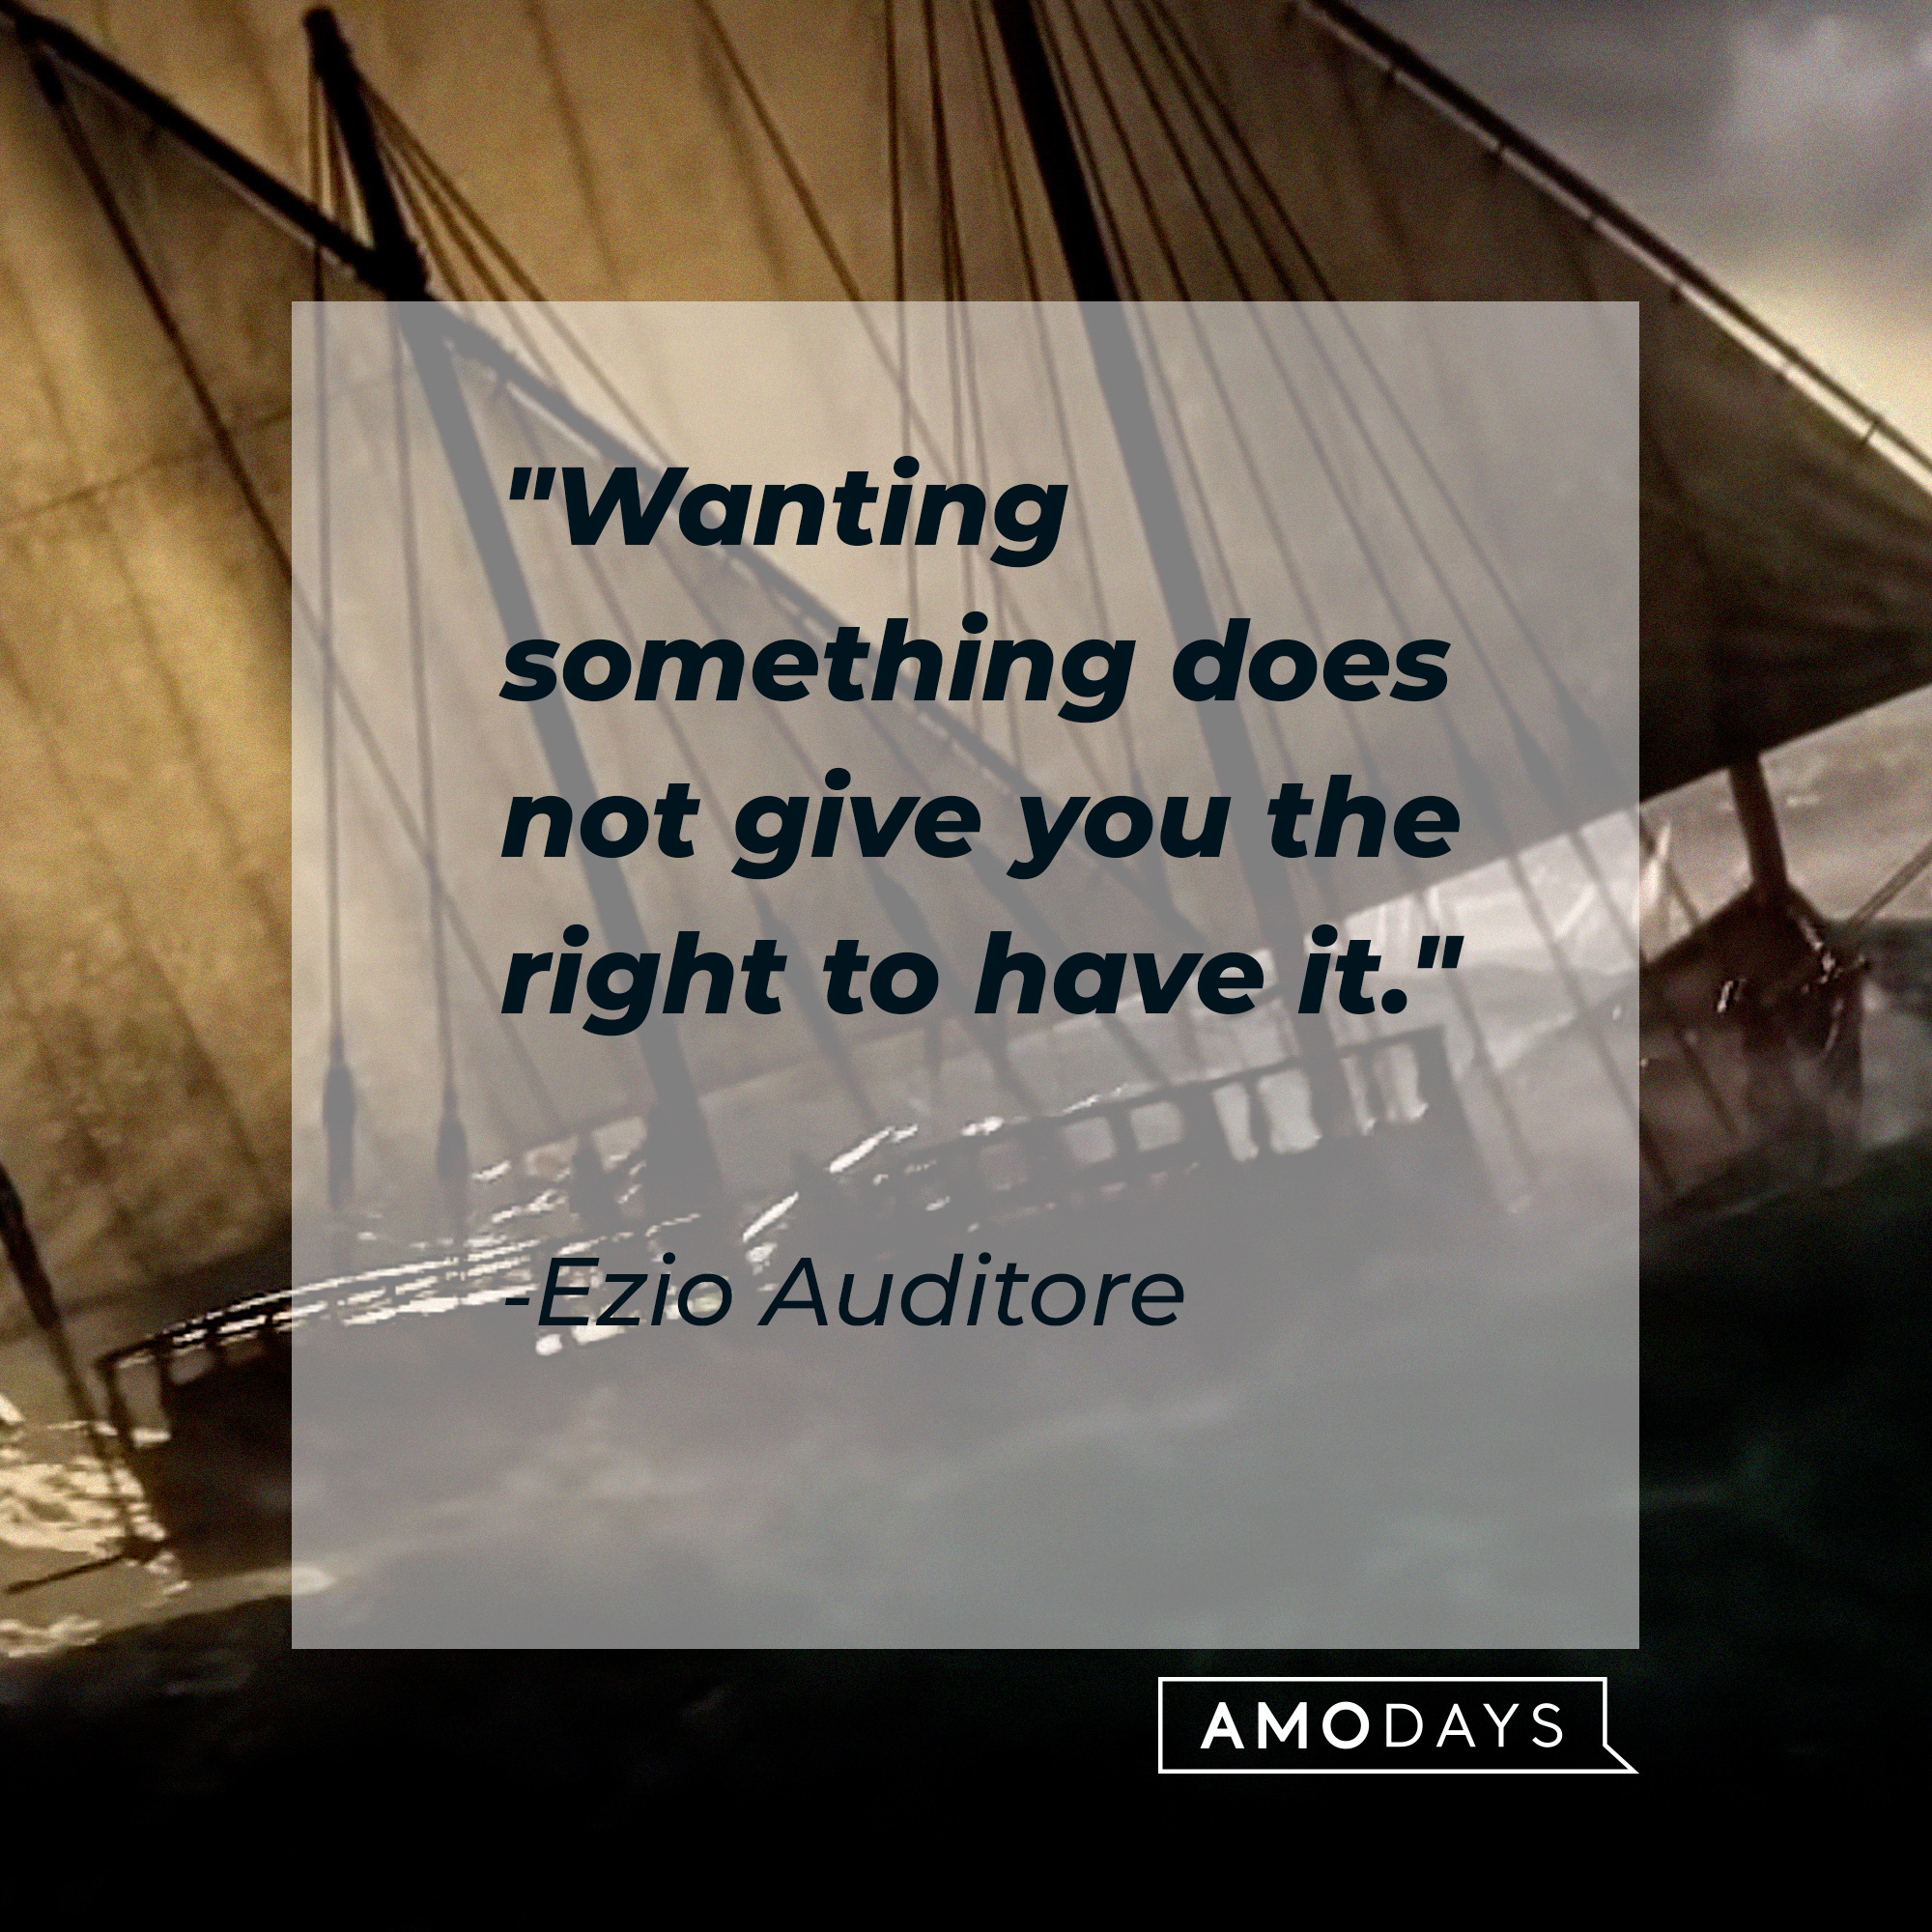 Enzo Auditore's quote: "Wanting something does not give you the right to have it." | Source: youtube.com/UbisoftNA